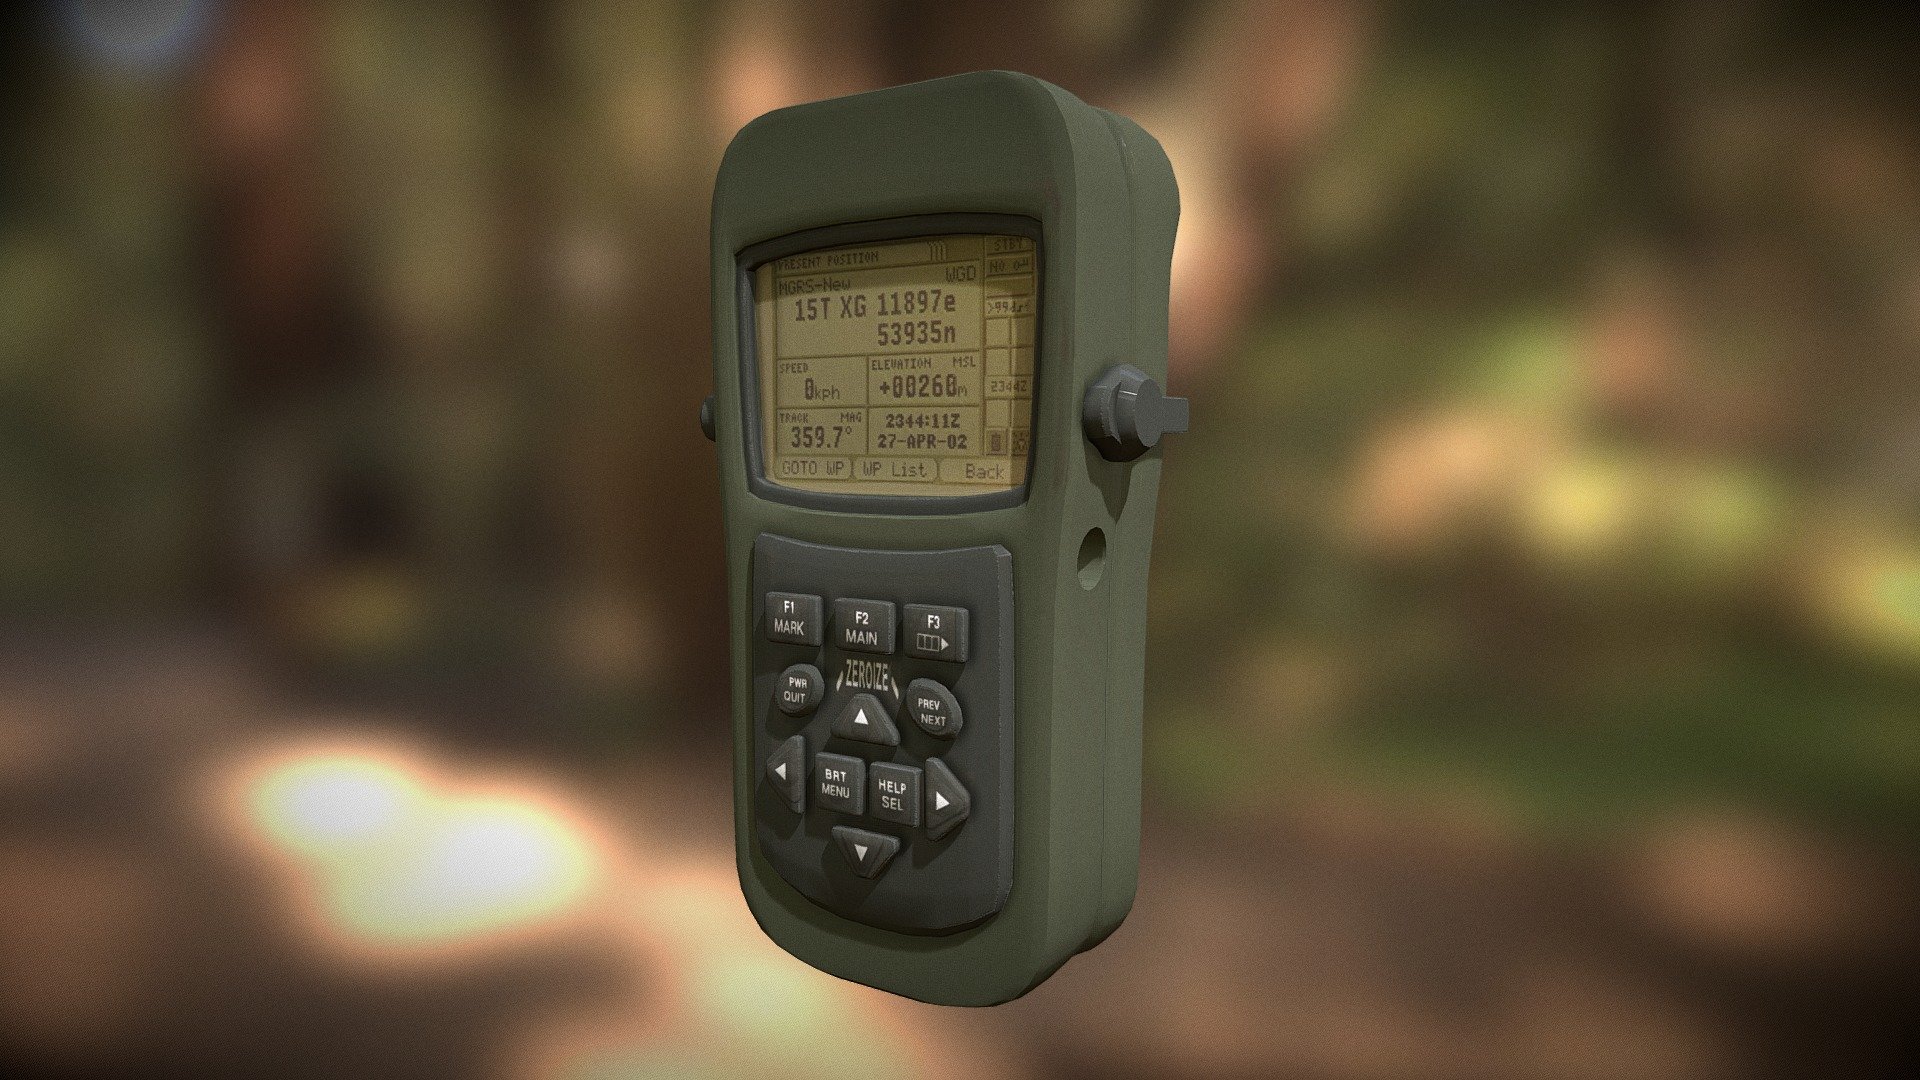 Defense Advanced GPS Receiver (DAGR - Art/Model by Outworld Studios

Must give credit to Outworld Studios if using the asset.

Show support by joining my discord: https://discord.gg/EgWSkp8Cxn - DAGR GPS - Military GPS - Buy Royalty Free 3D model by Outworld Studios (@outworldstudios) 3d model